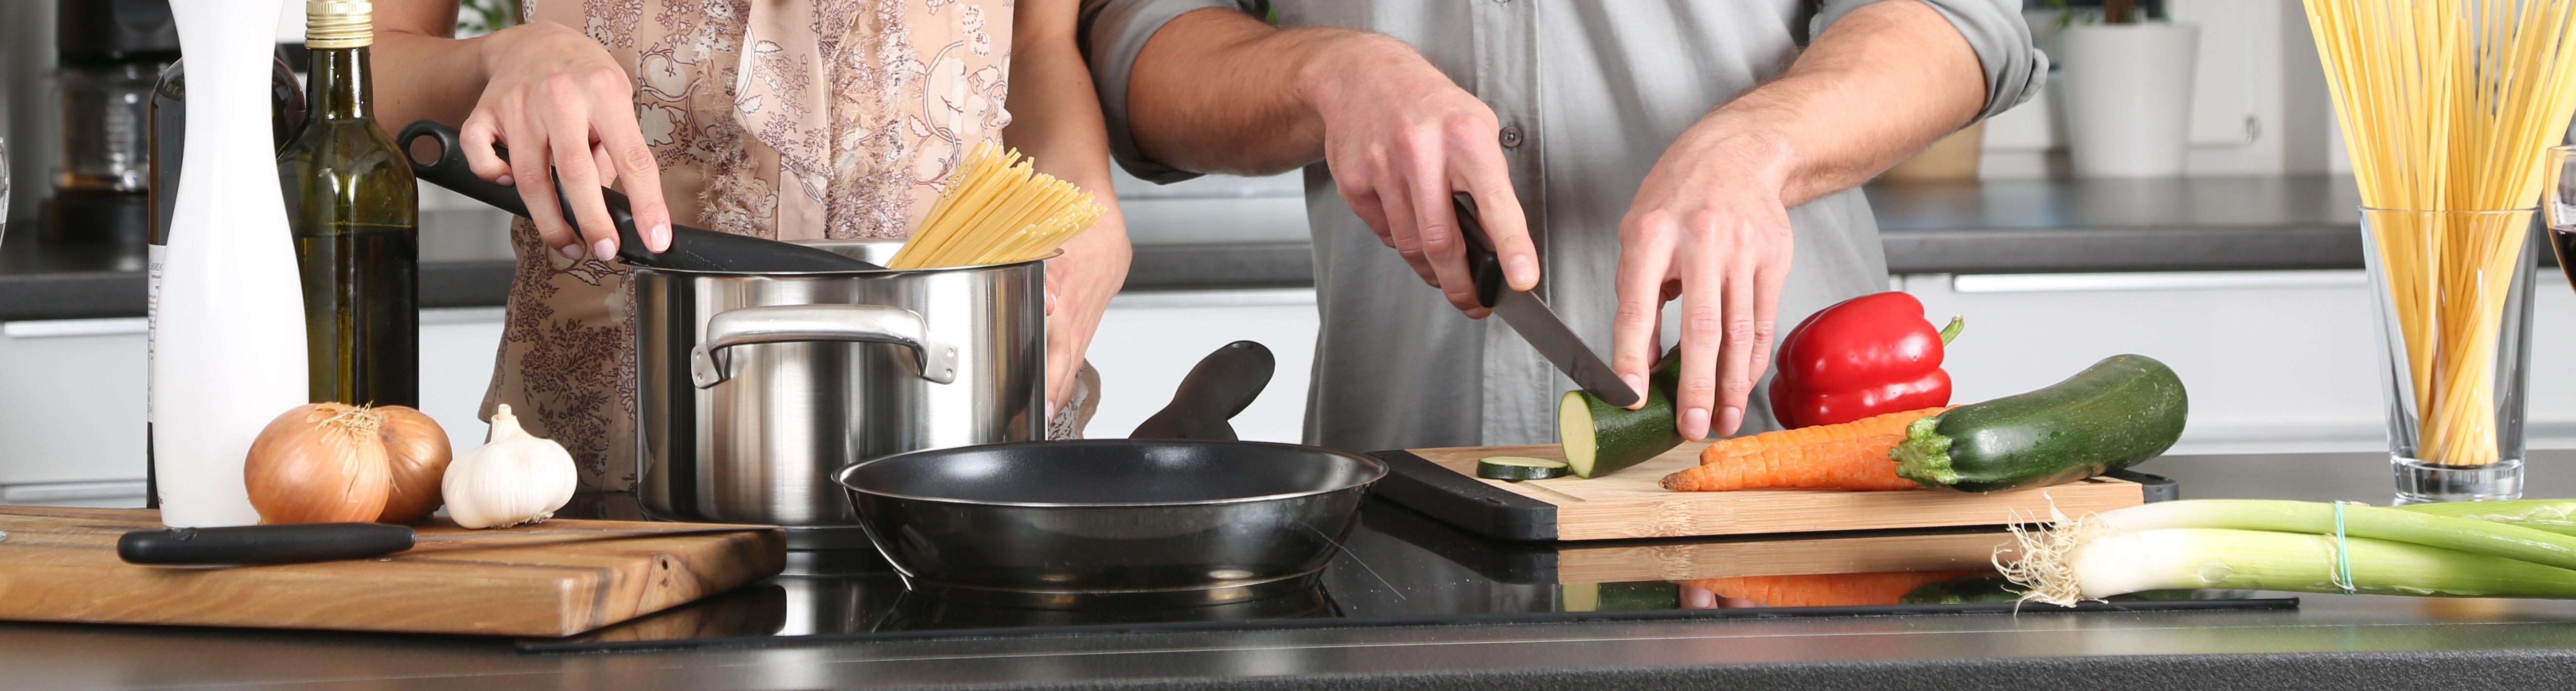 two people cooking pasta and vegetables together